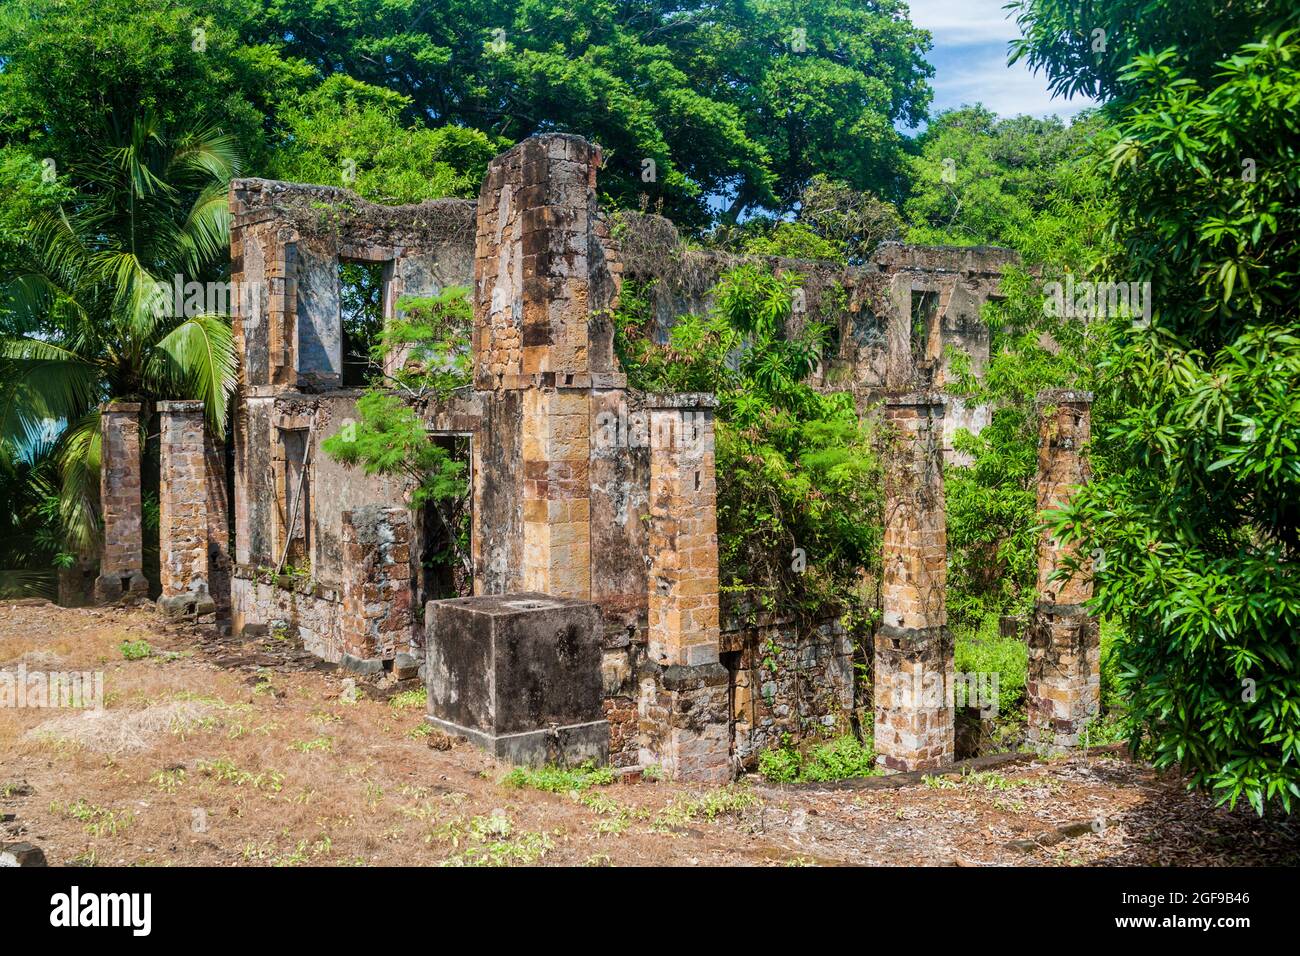 Ruins of a former penal colony at Ile Royale, one of the islands of Iles du Salut (Islands of Salvation) in French Guiana Stock Photo